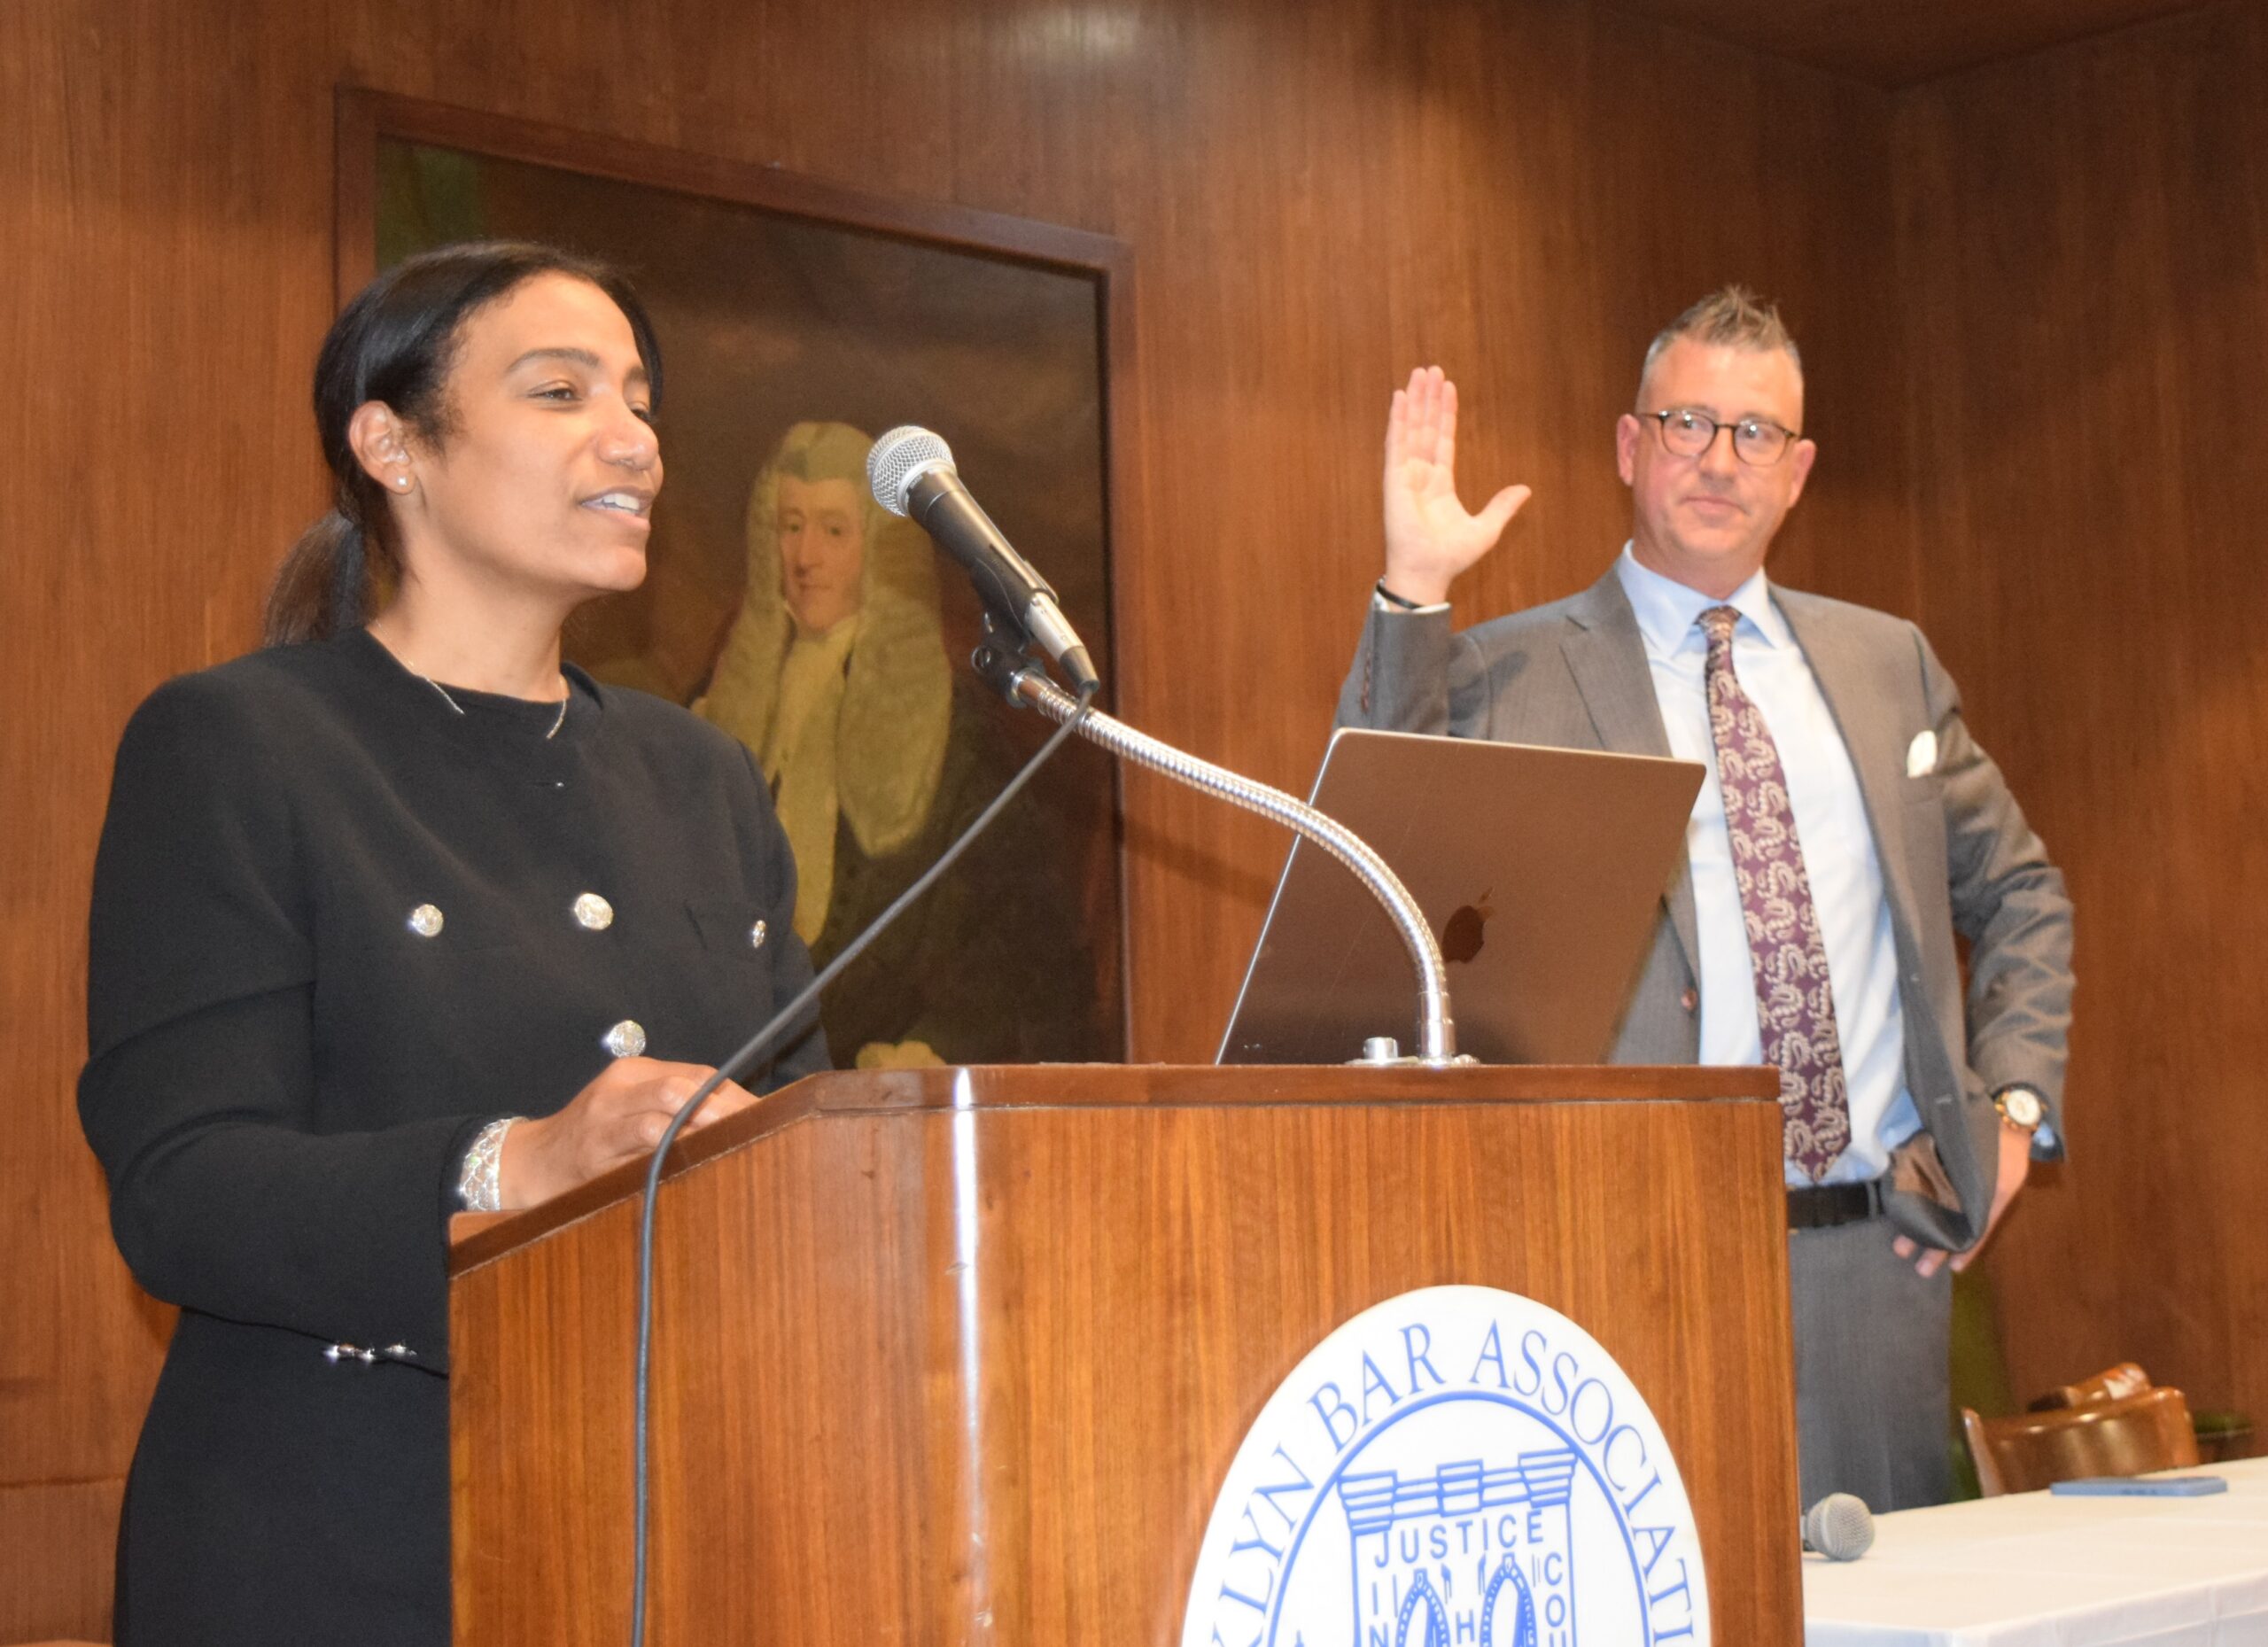 Judge Keshia Espinal administers the oath of office to Darran Winslow, marking his continuation as President of the Kings County Criminal Bar Association (KCCBA) for another year at KCCBA CLA on Federal Crimes. Brooklyn Eagle photos by Robert Abruzzese